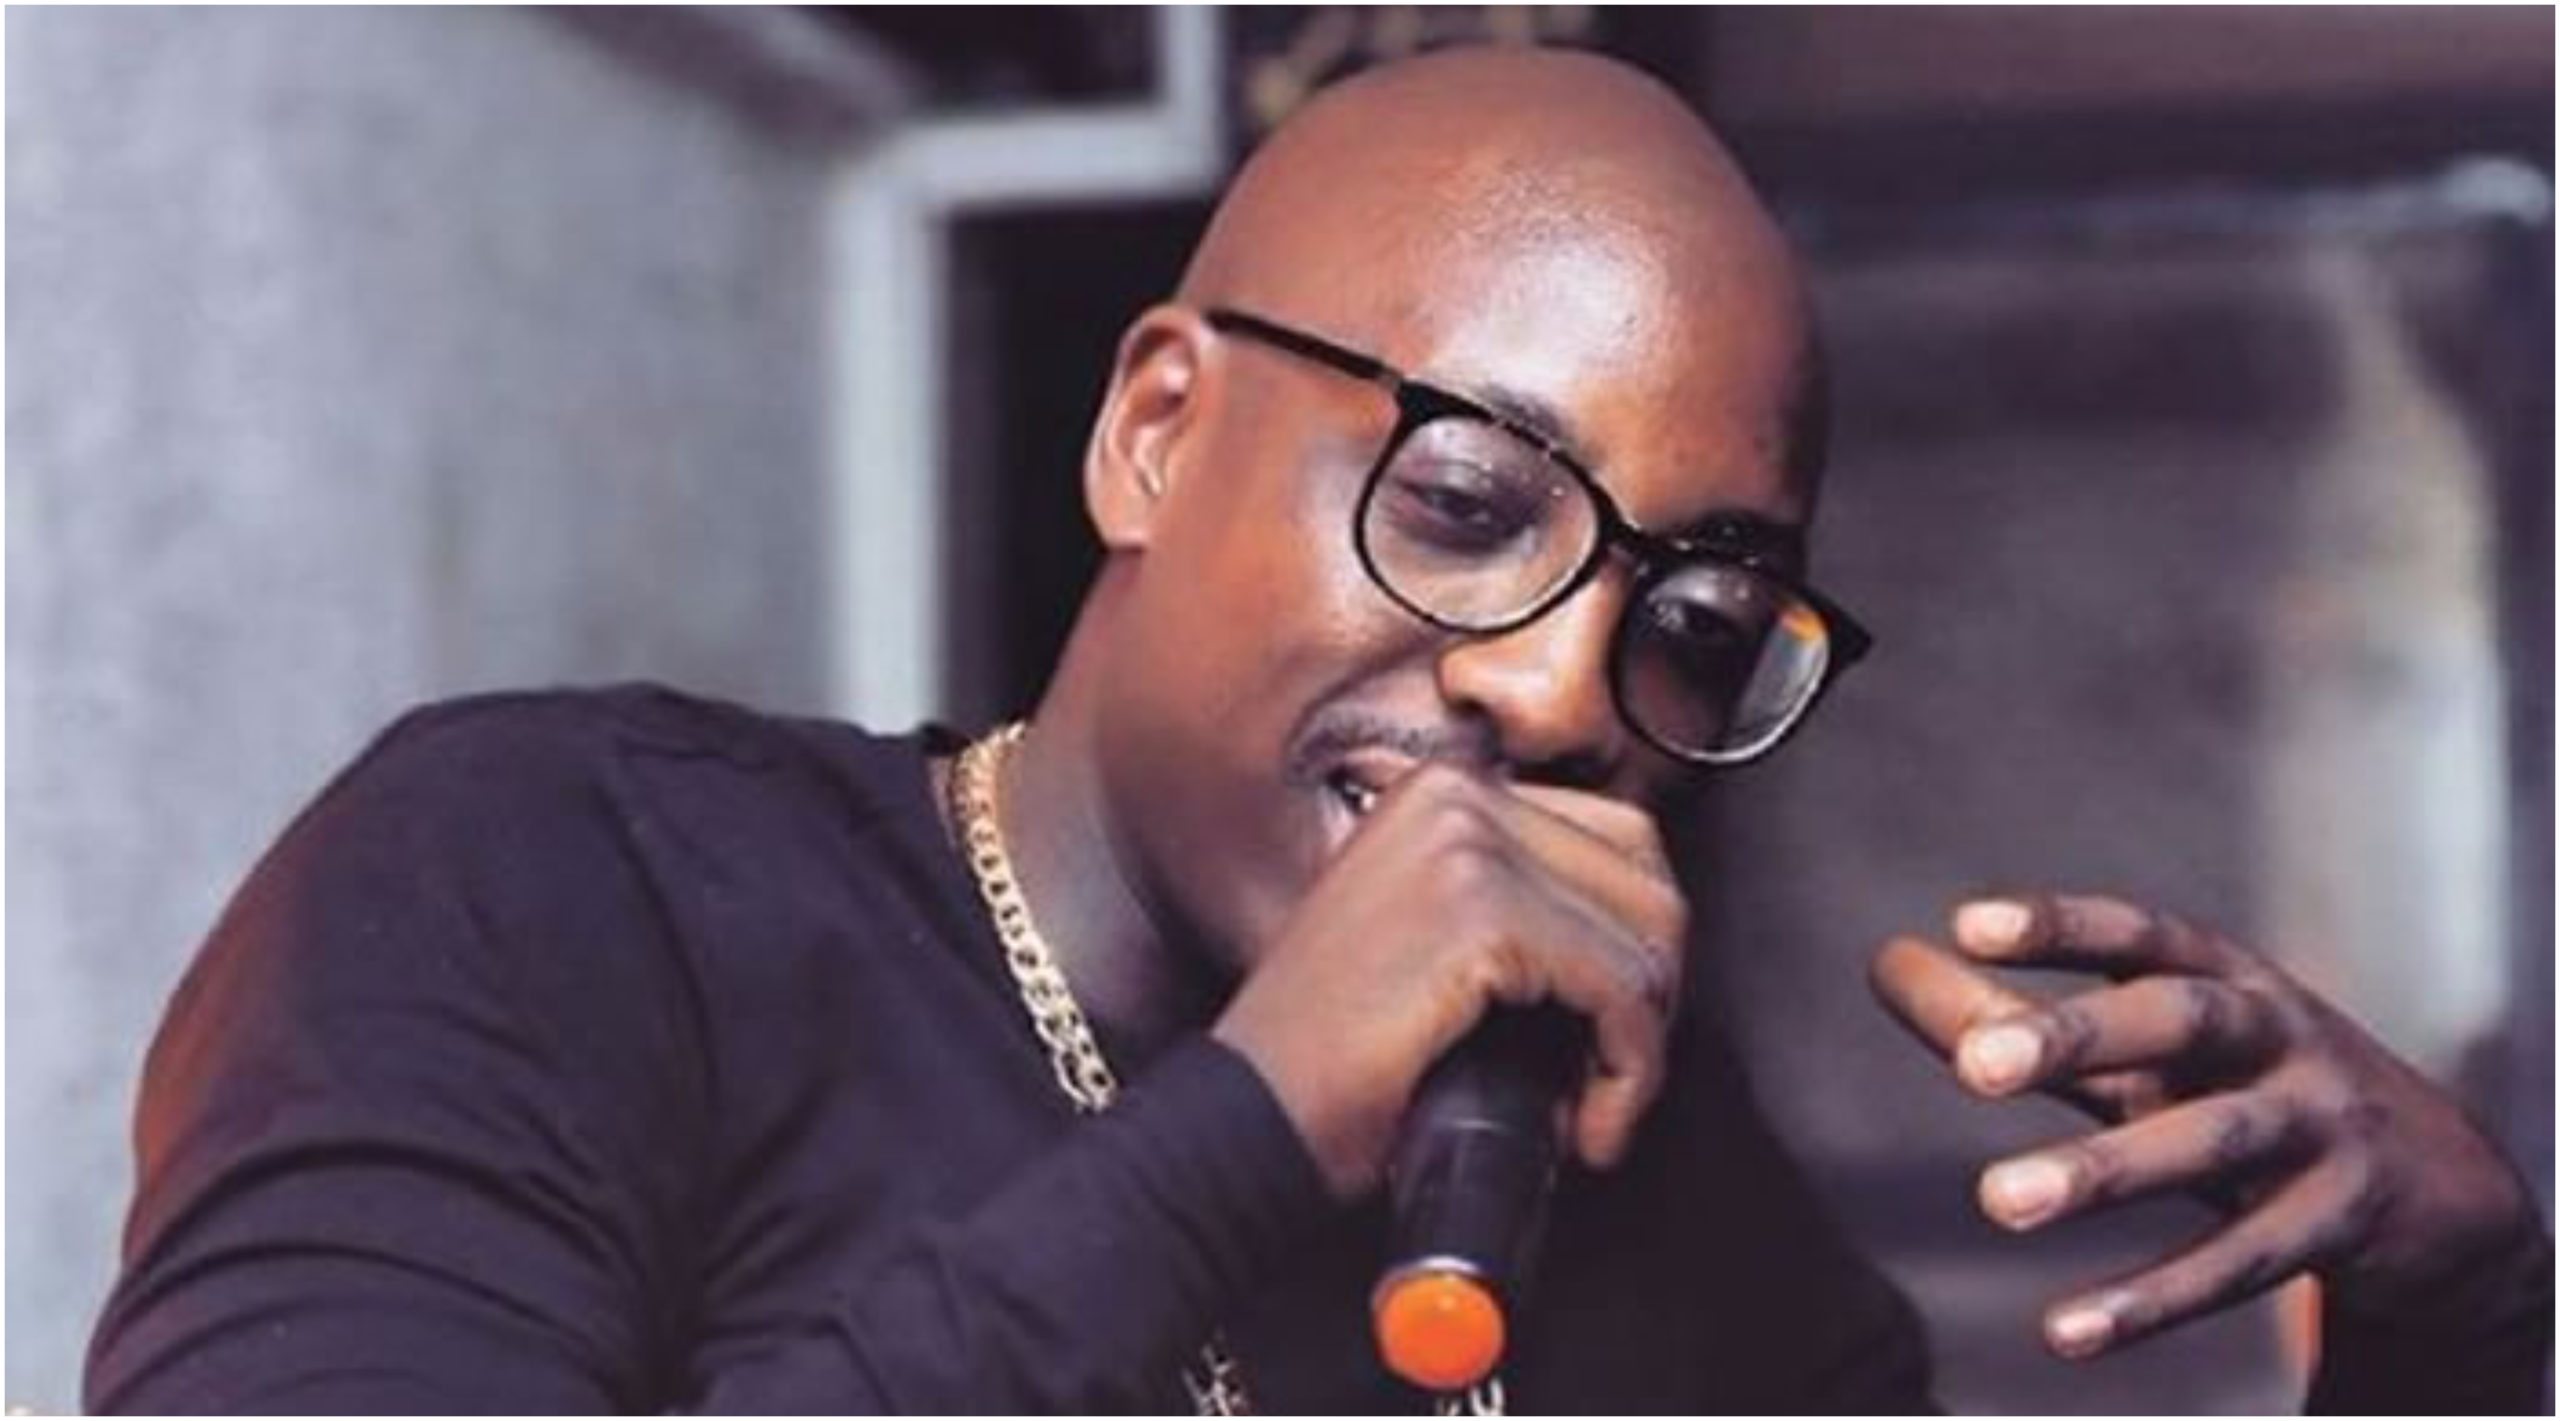 Sauti Sol’s Bien Aime speaks after testing positive for COVID-19